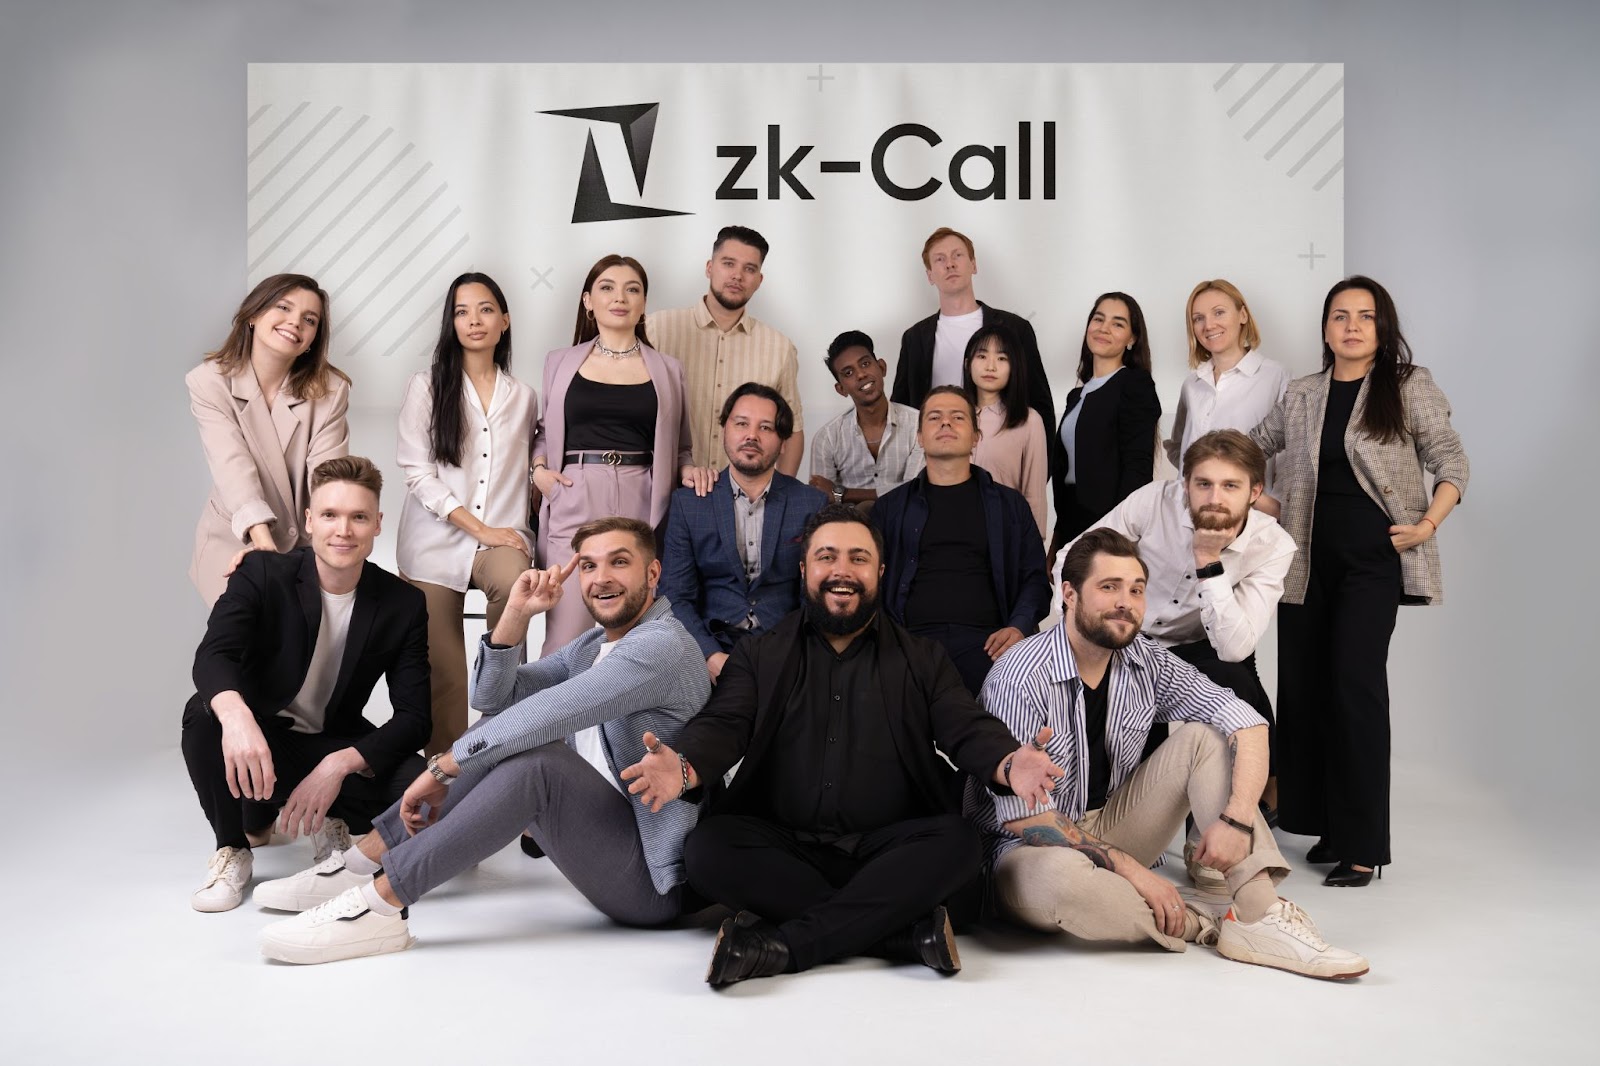 zk-Call & Digital Co. Enters Market with Ambitious Plans for Innovation and Growth